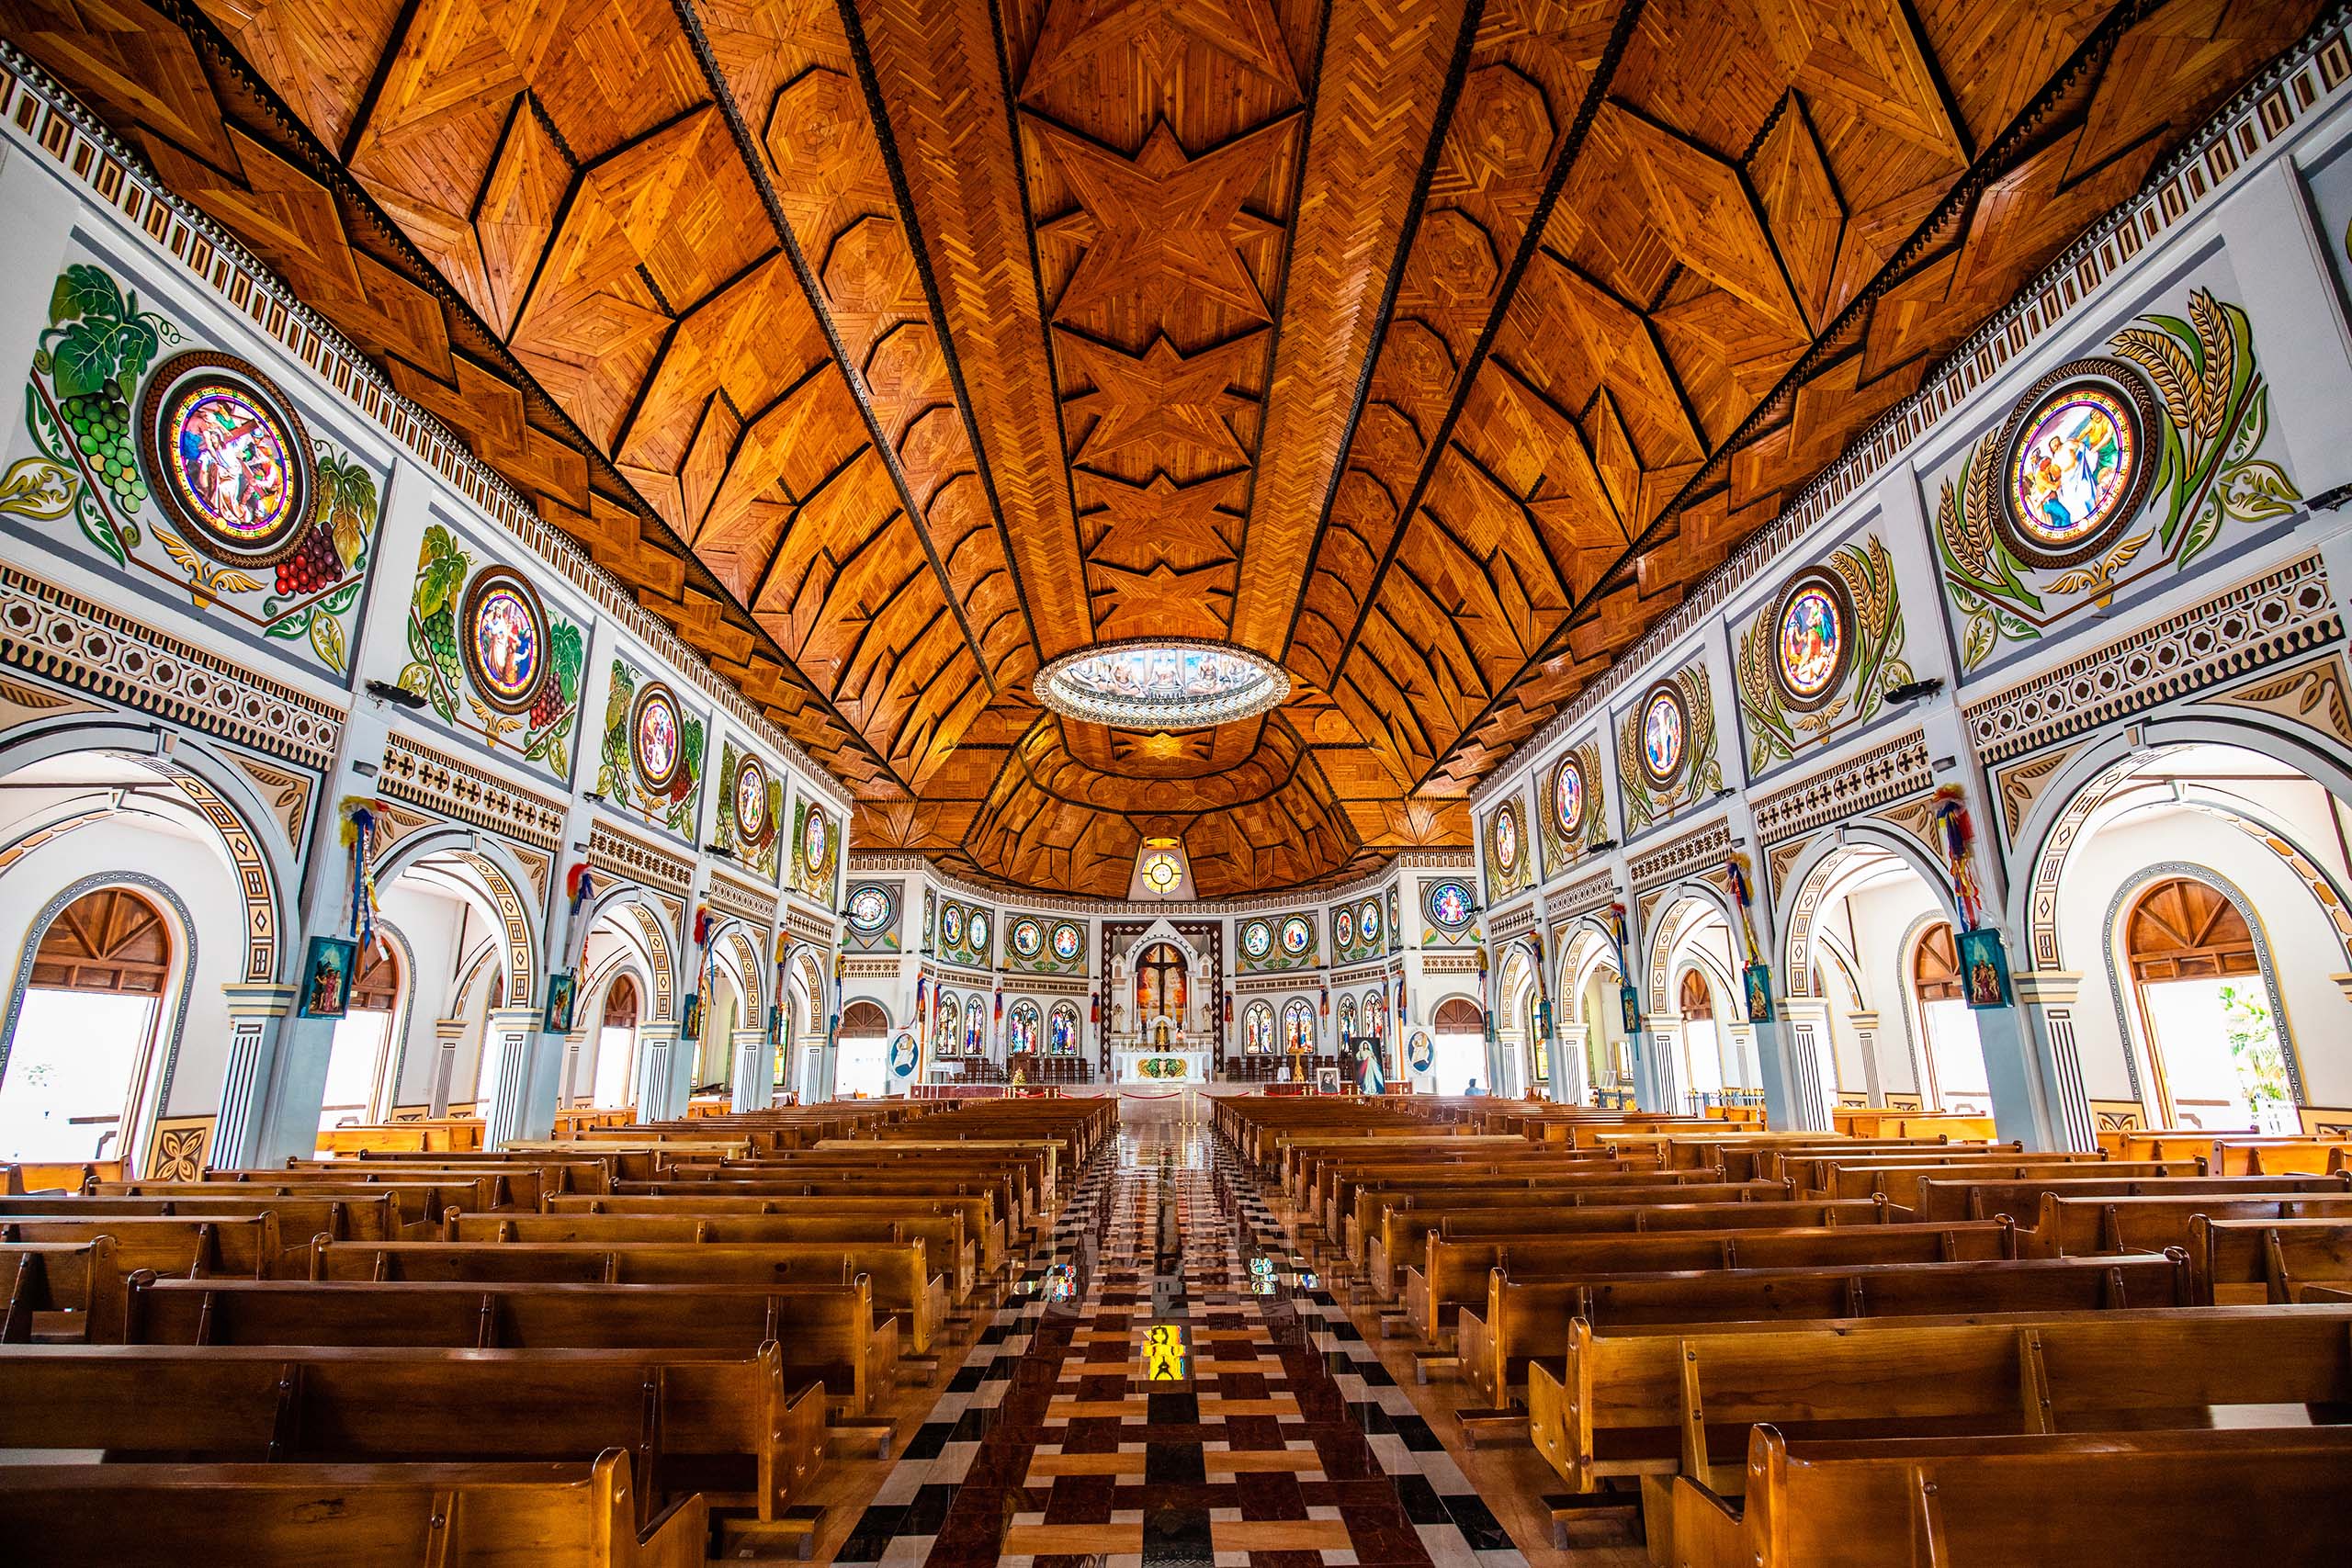 Apia, Samoa - SEPT 30 2016: Interior of the cathedral of the immaculate conception in Apia, capital of Samoa.